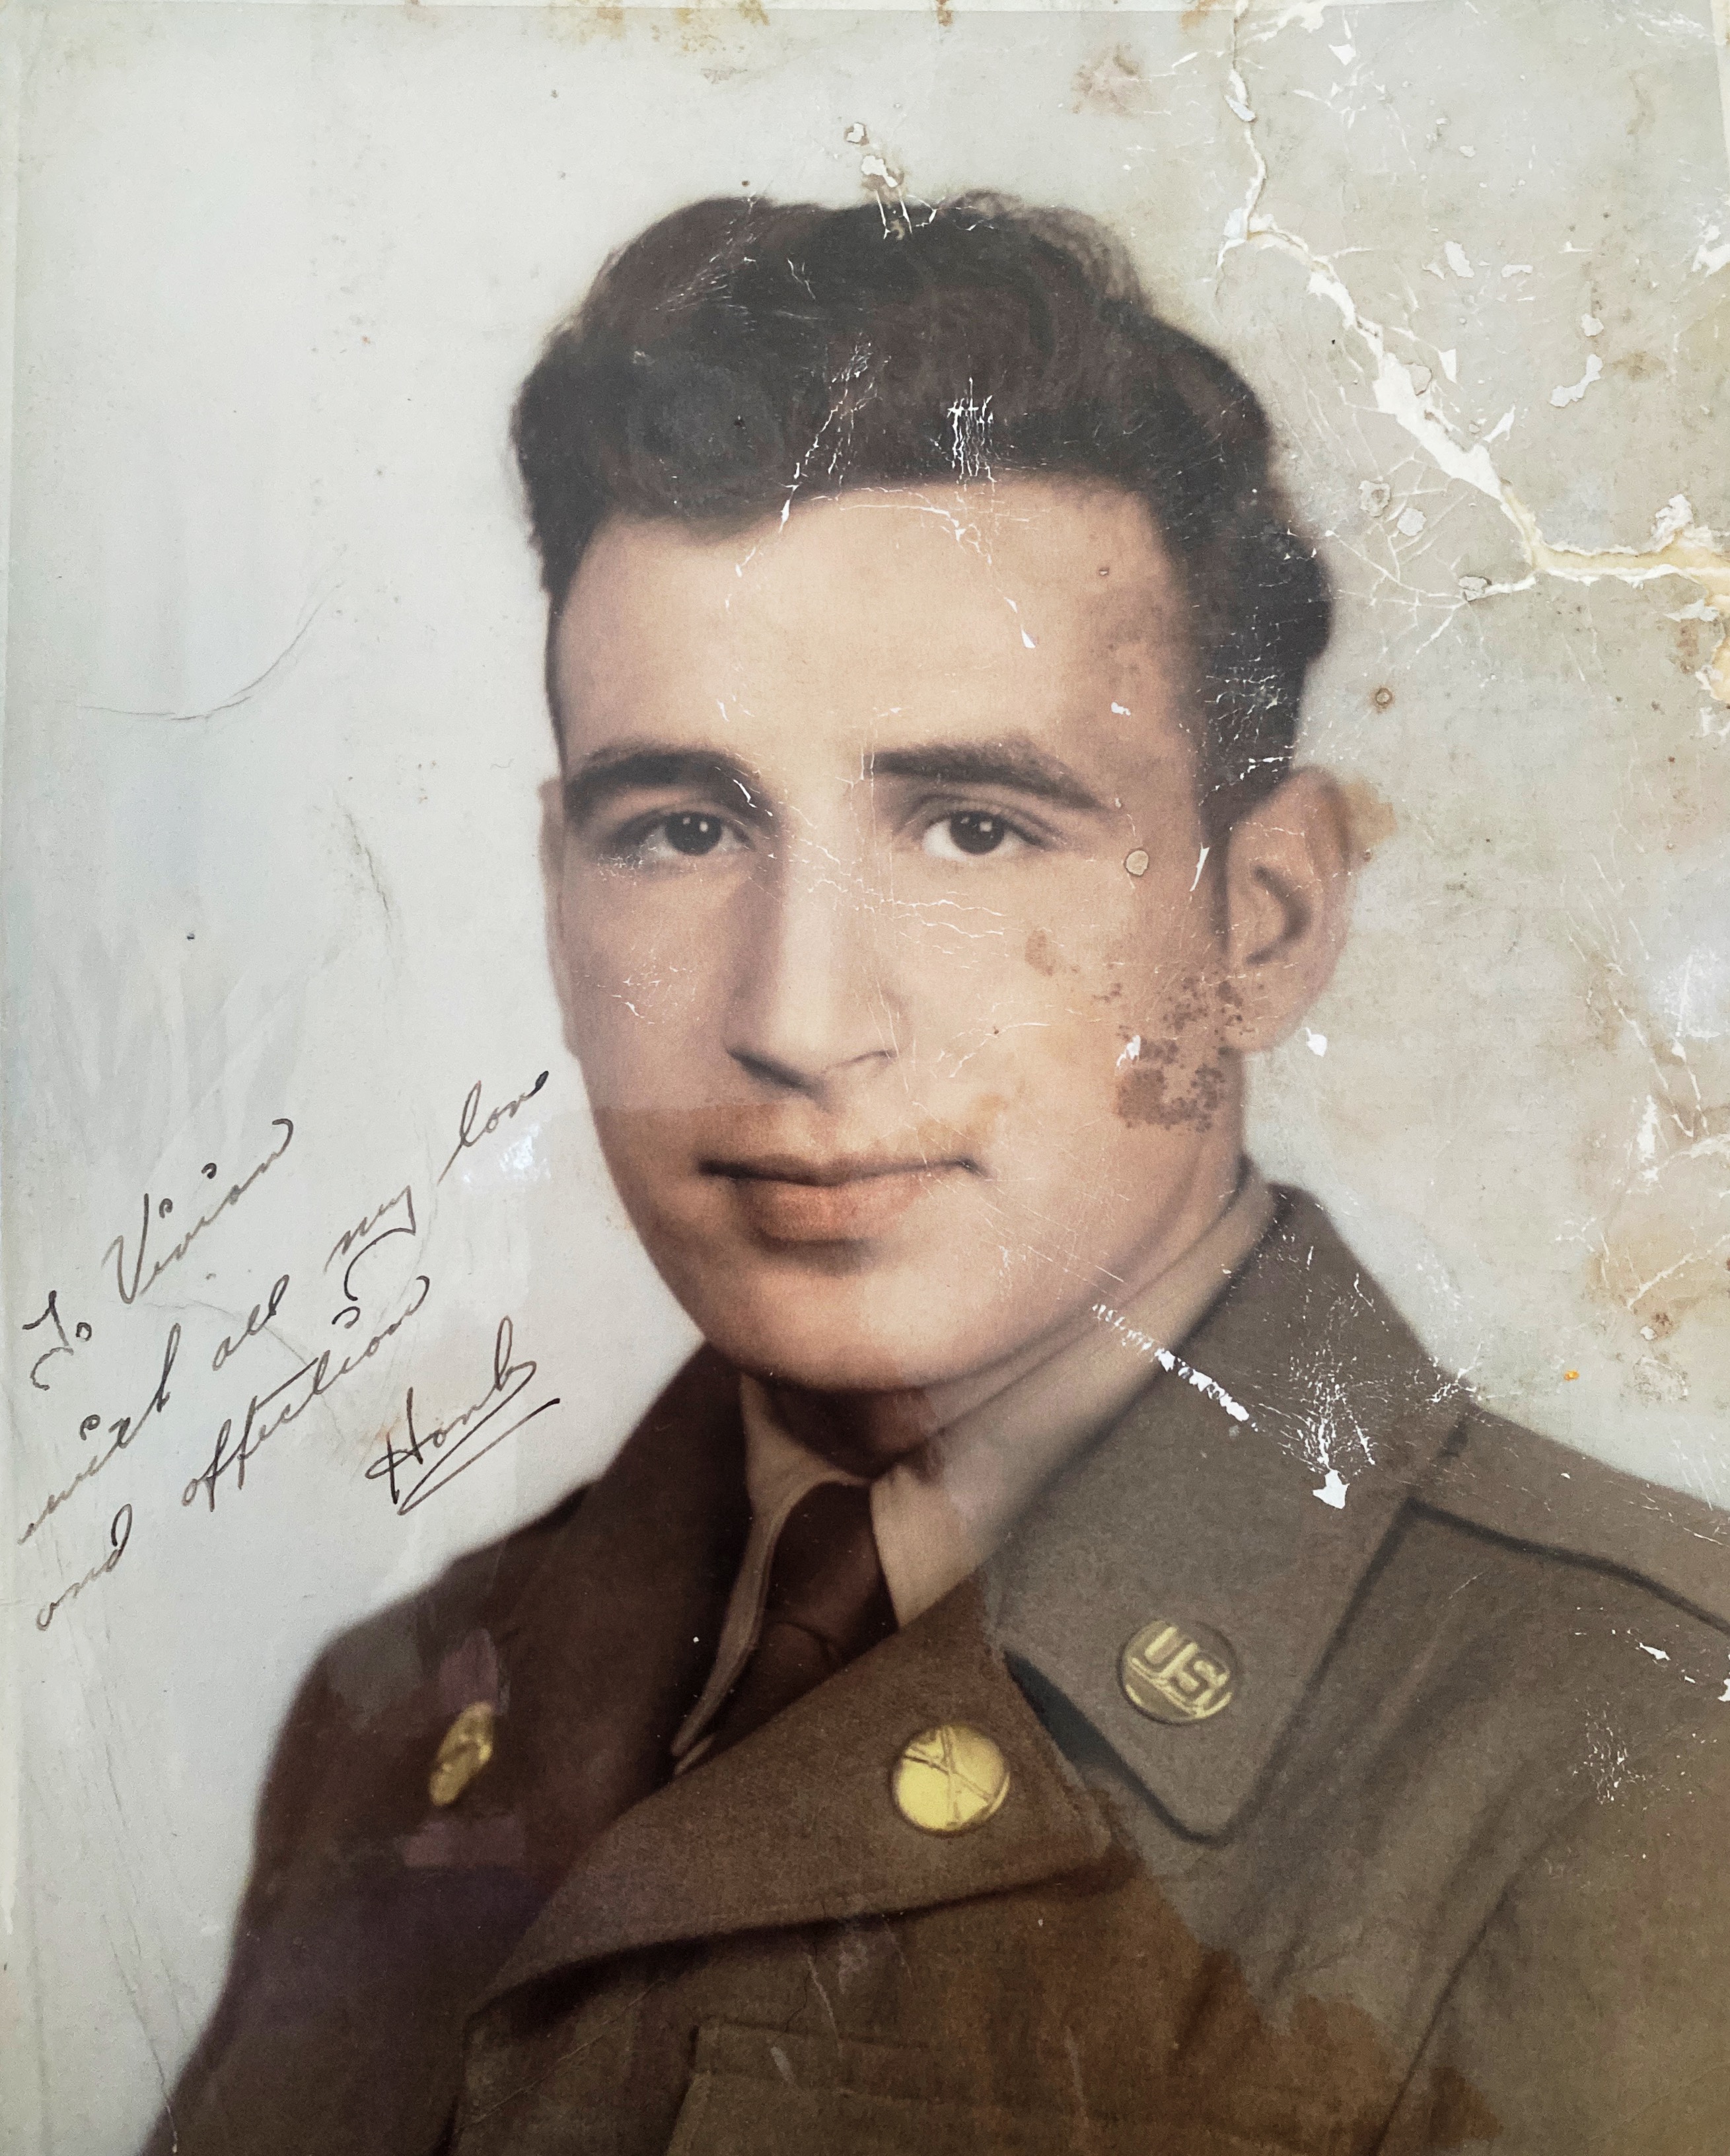 Dad in the army 1952